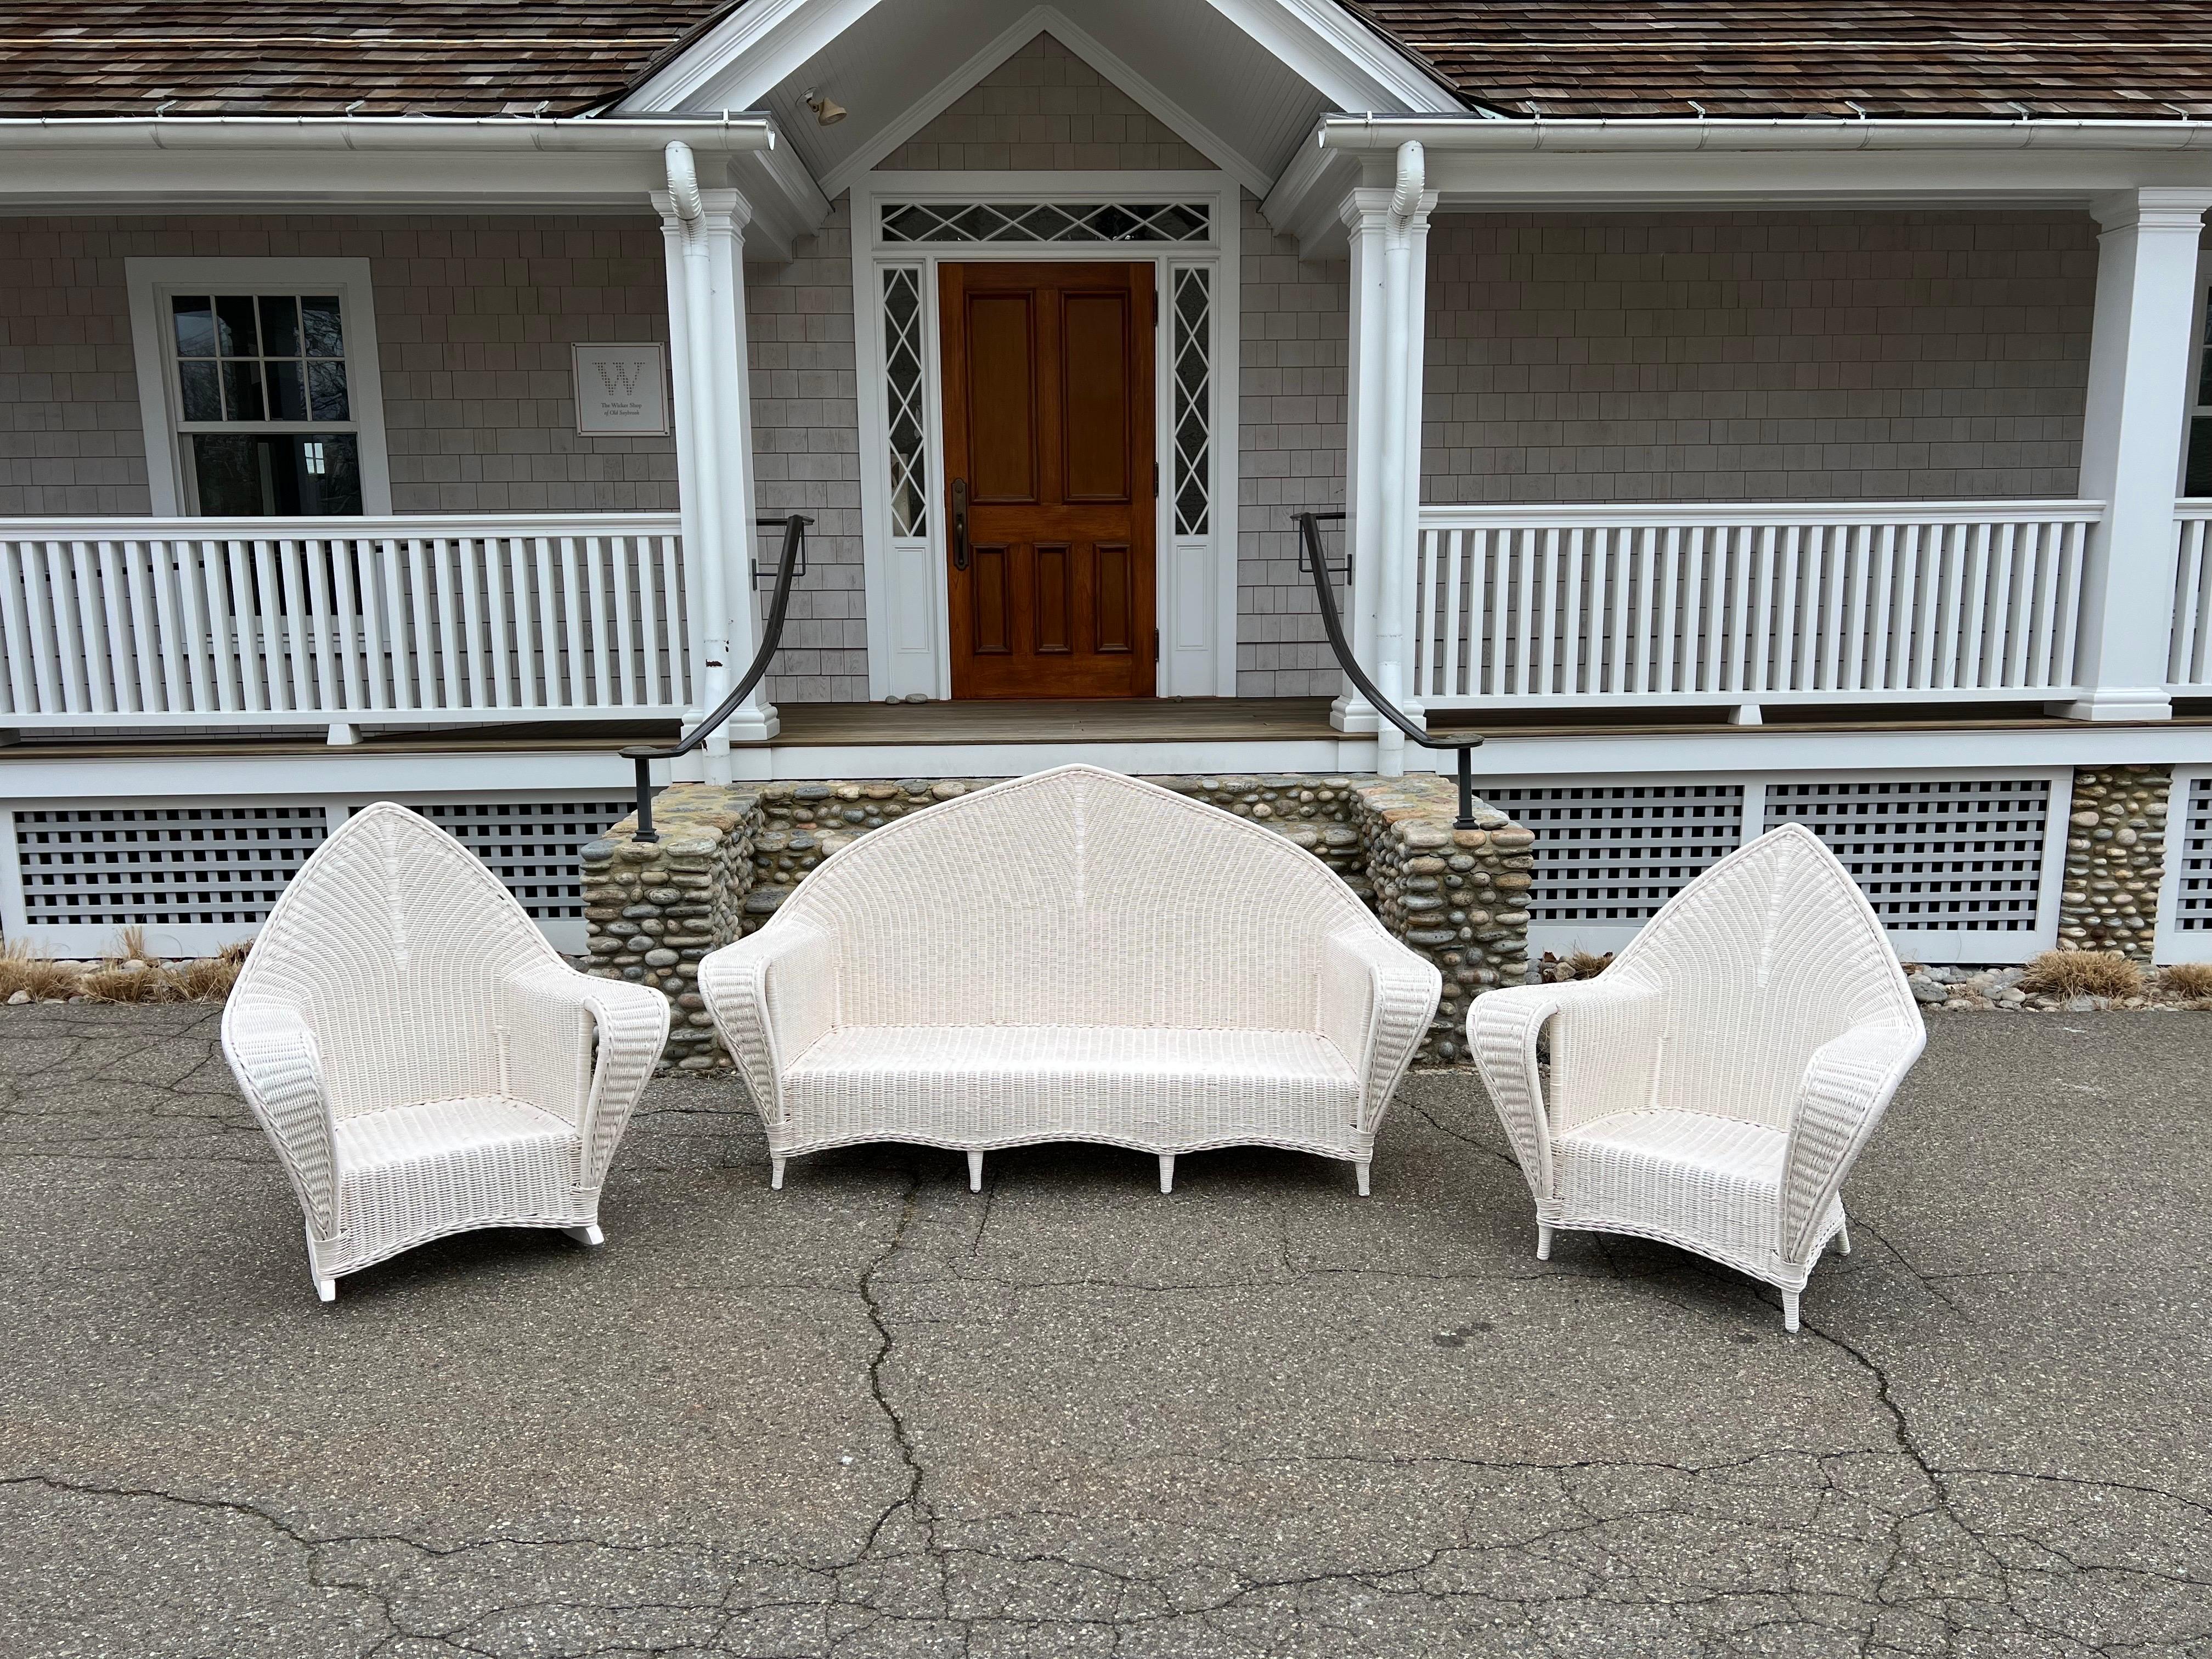 Three piece antique wicker set woven of reed and freshly painted white. Sofa measures 76” wide, 34” deep, 41.5” tall, seat without cushion is 13”. Chair measures 38” wide, 40.5” tall, 32.5” deep with a seat height without cushion of 13”. Rocker